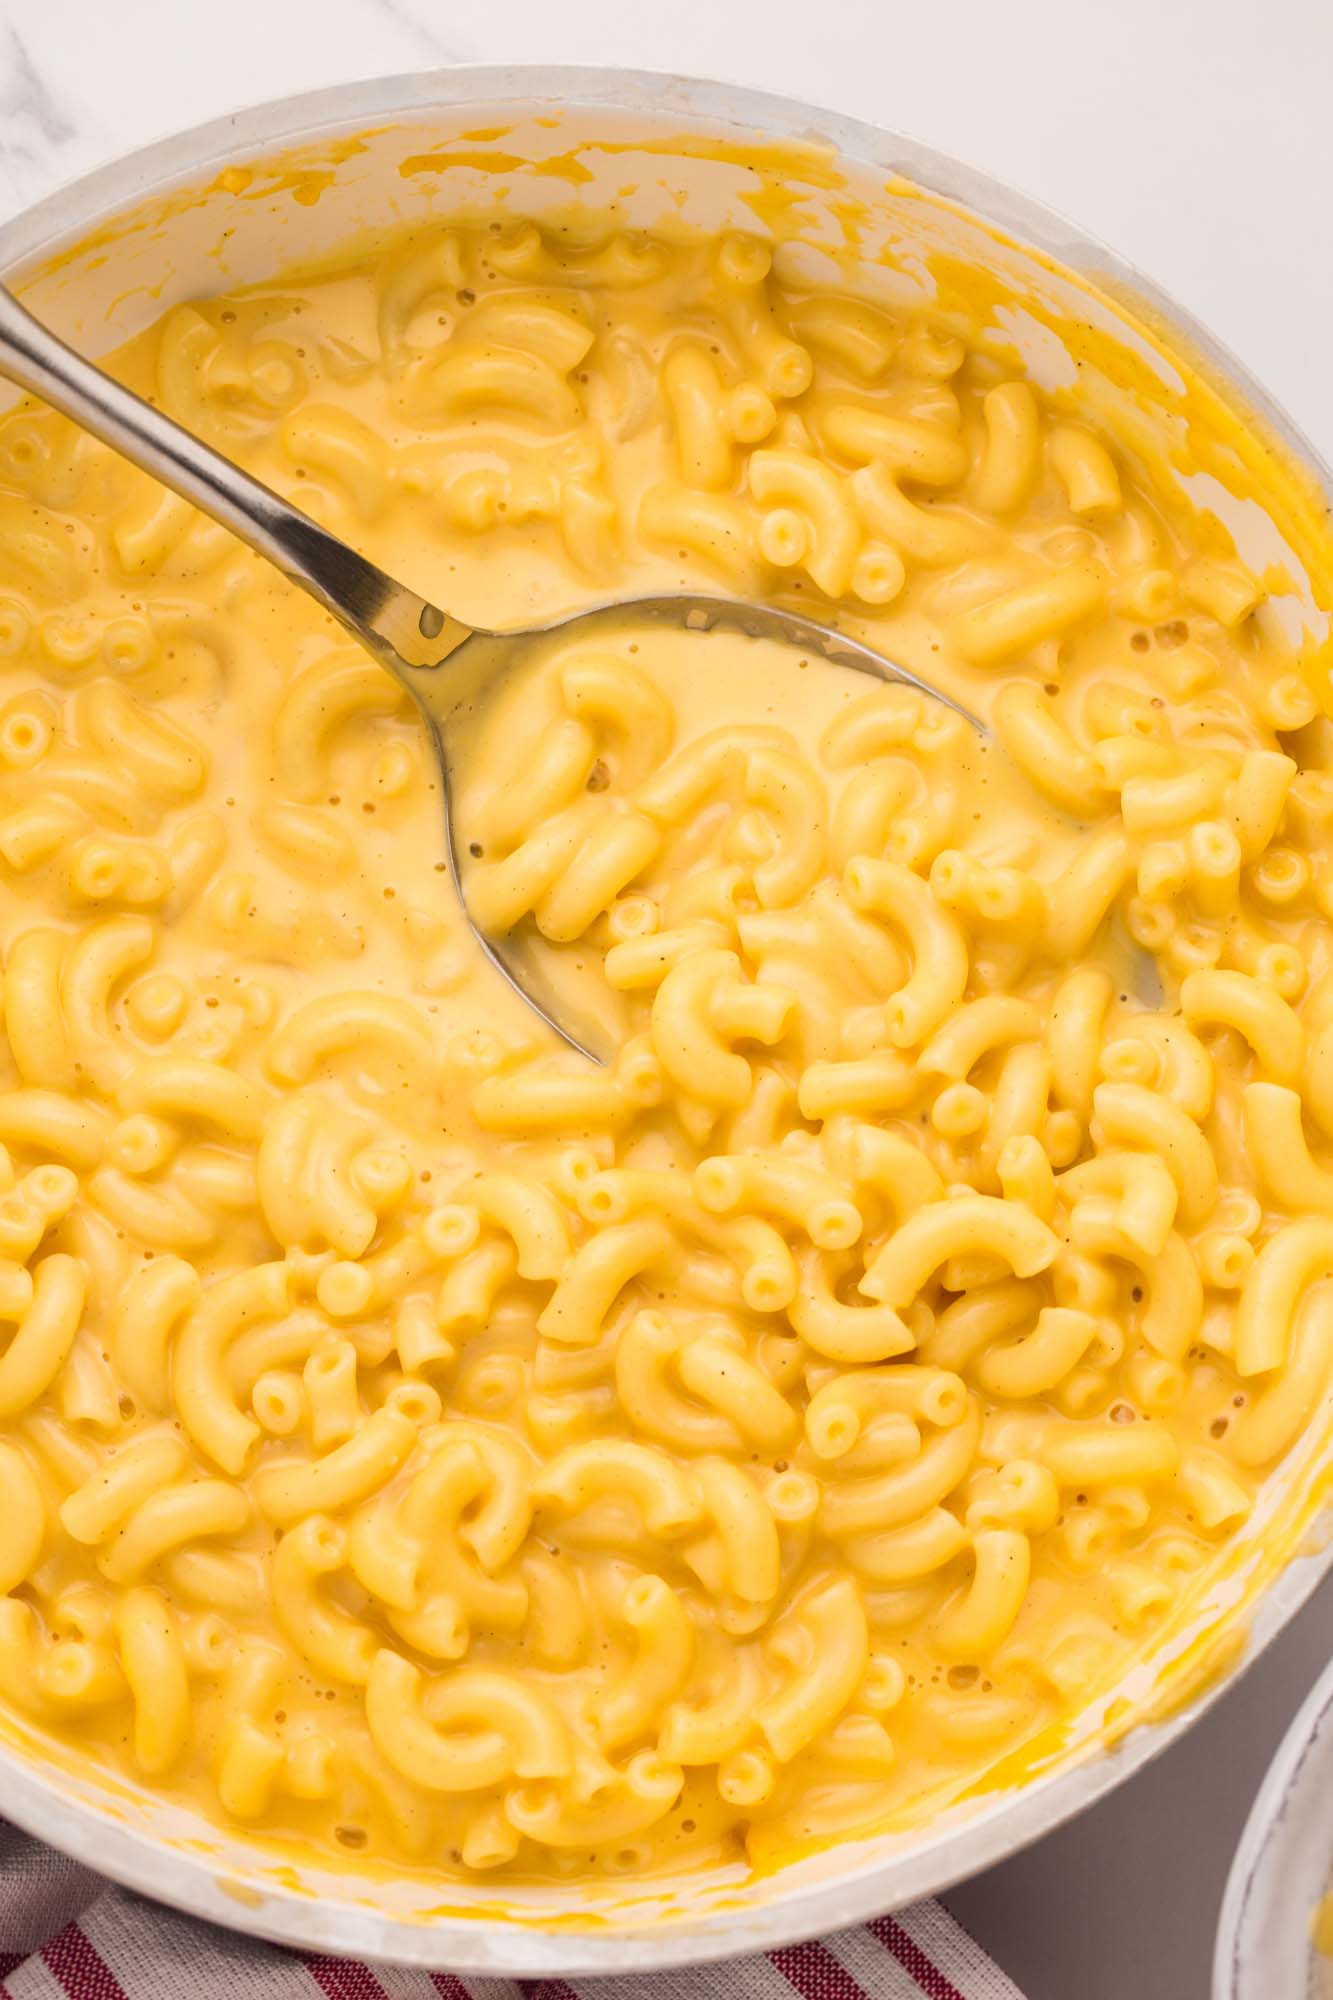 A large white saucepan filled with stovetop mac and cheese made with elbow noodles. a metal serving spoon is stirring it.